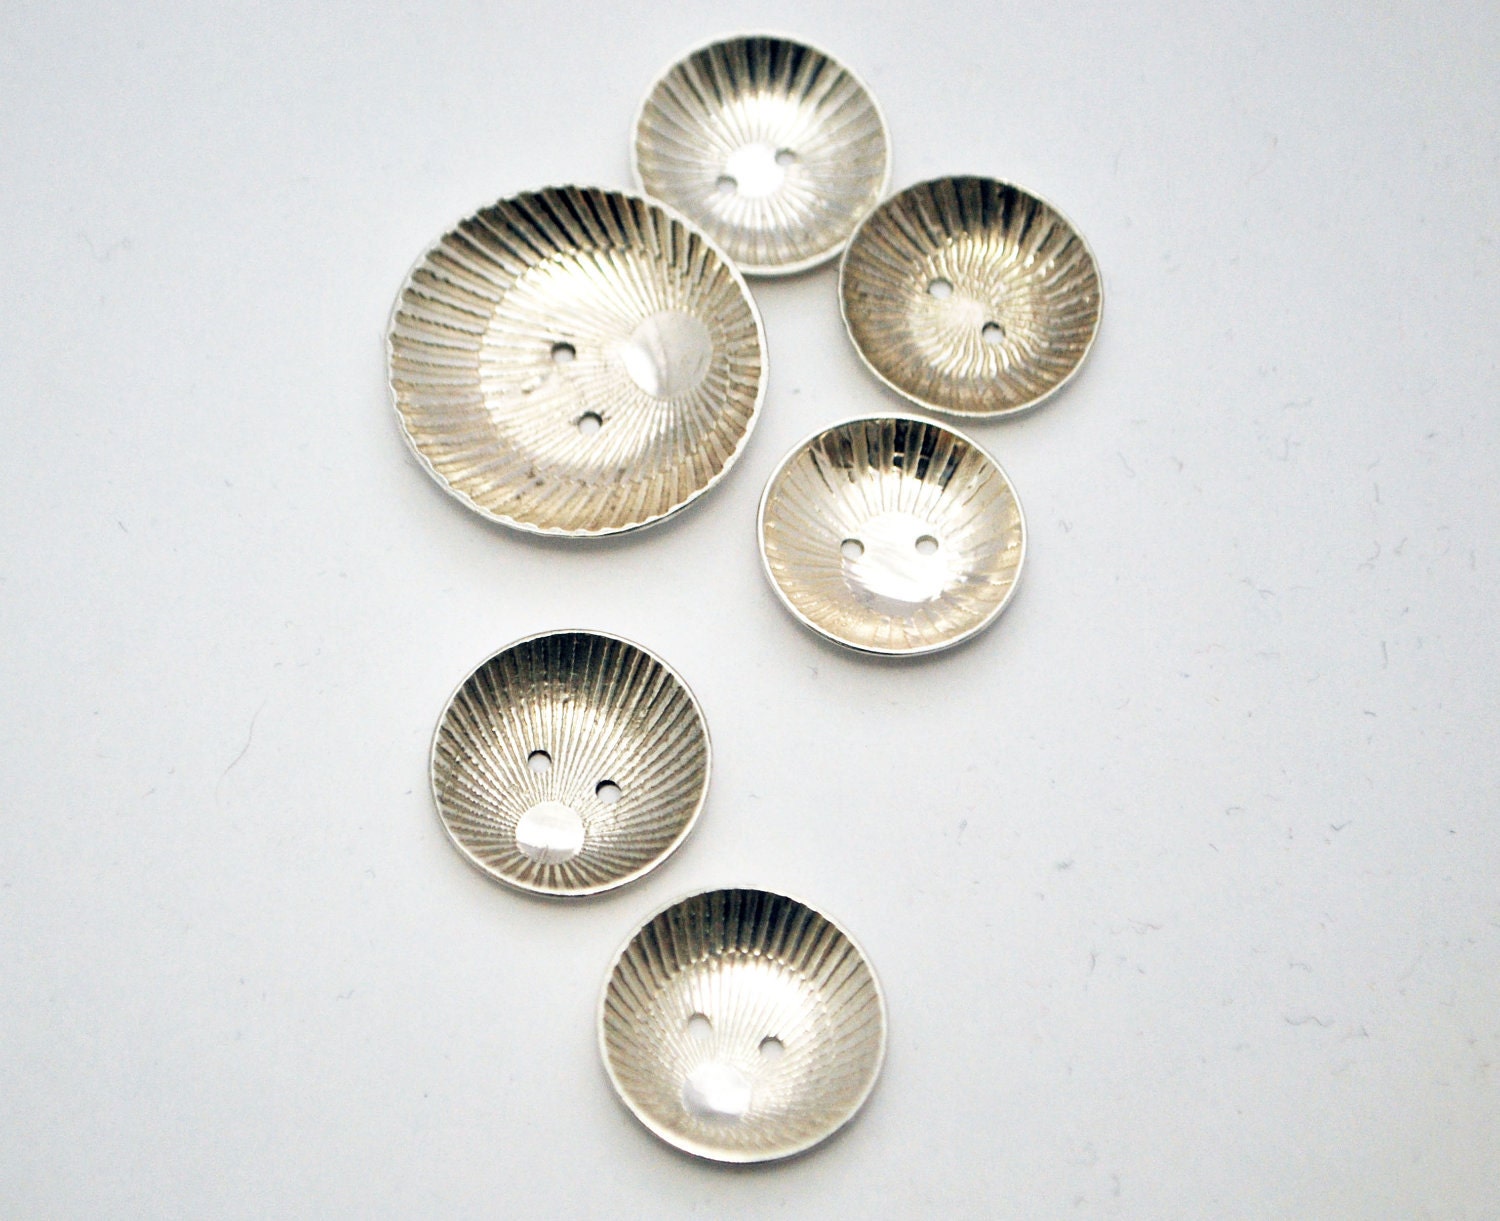 Handmade Sterling silver buttons- Japanese Illusion buttons - Large Etched silver buttons - x6 - McDaddio